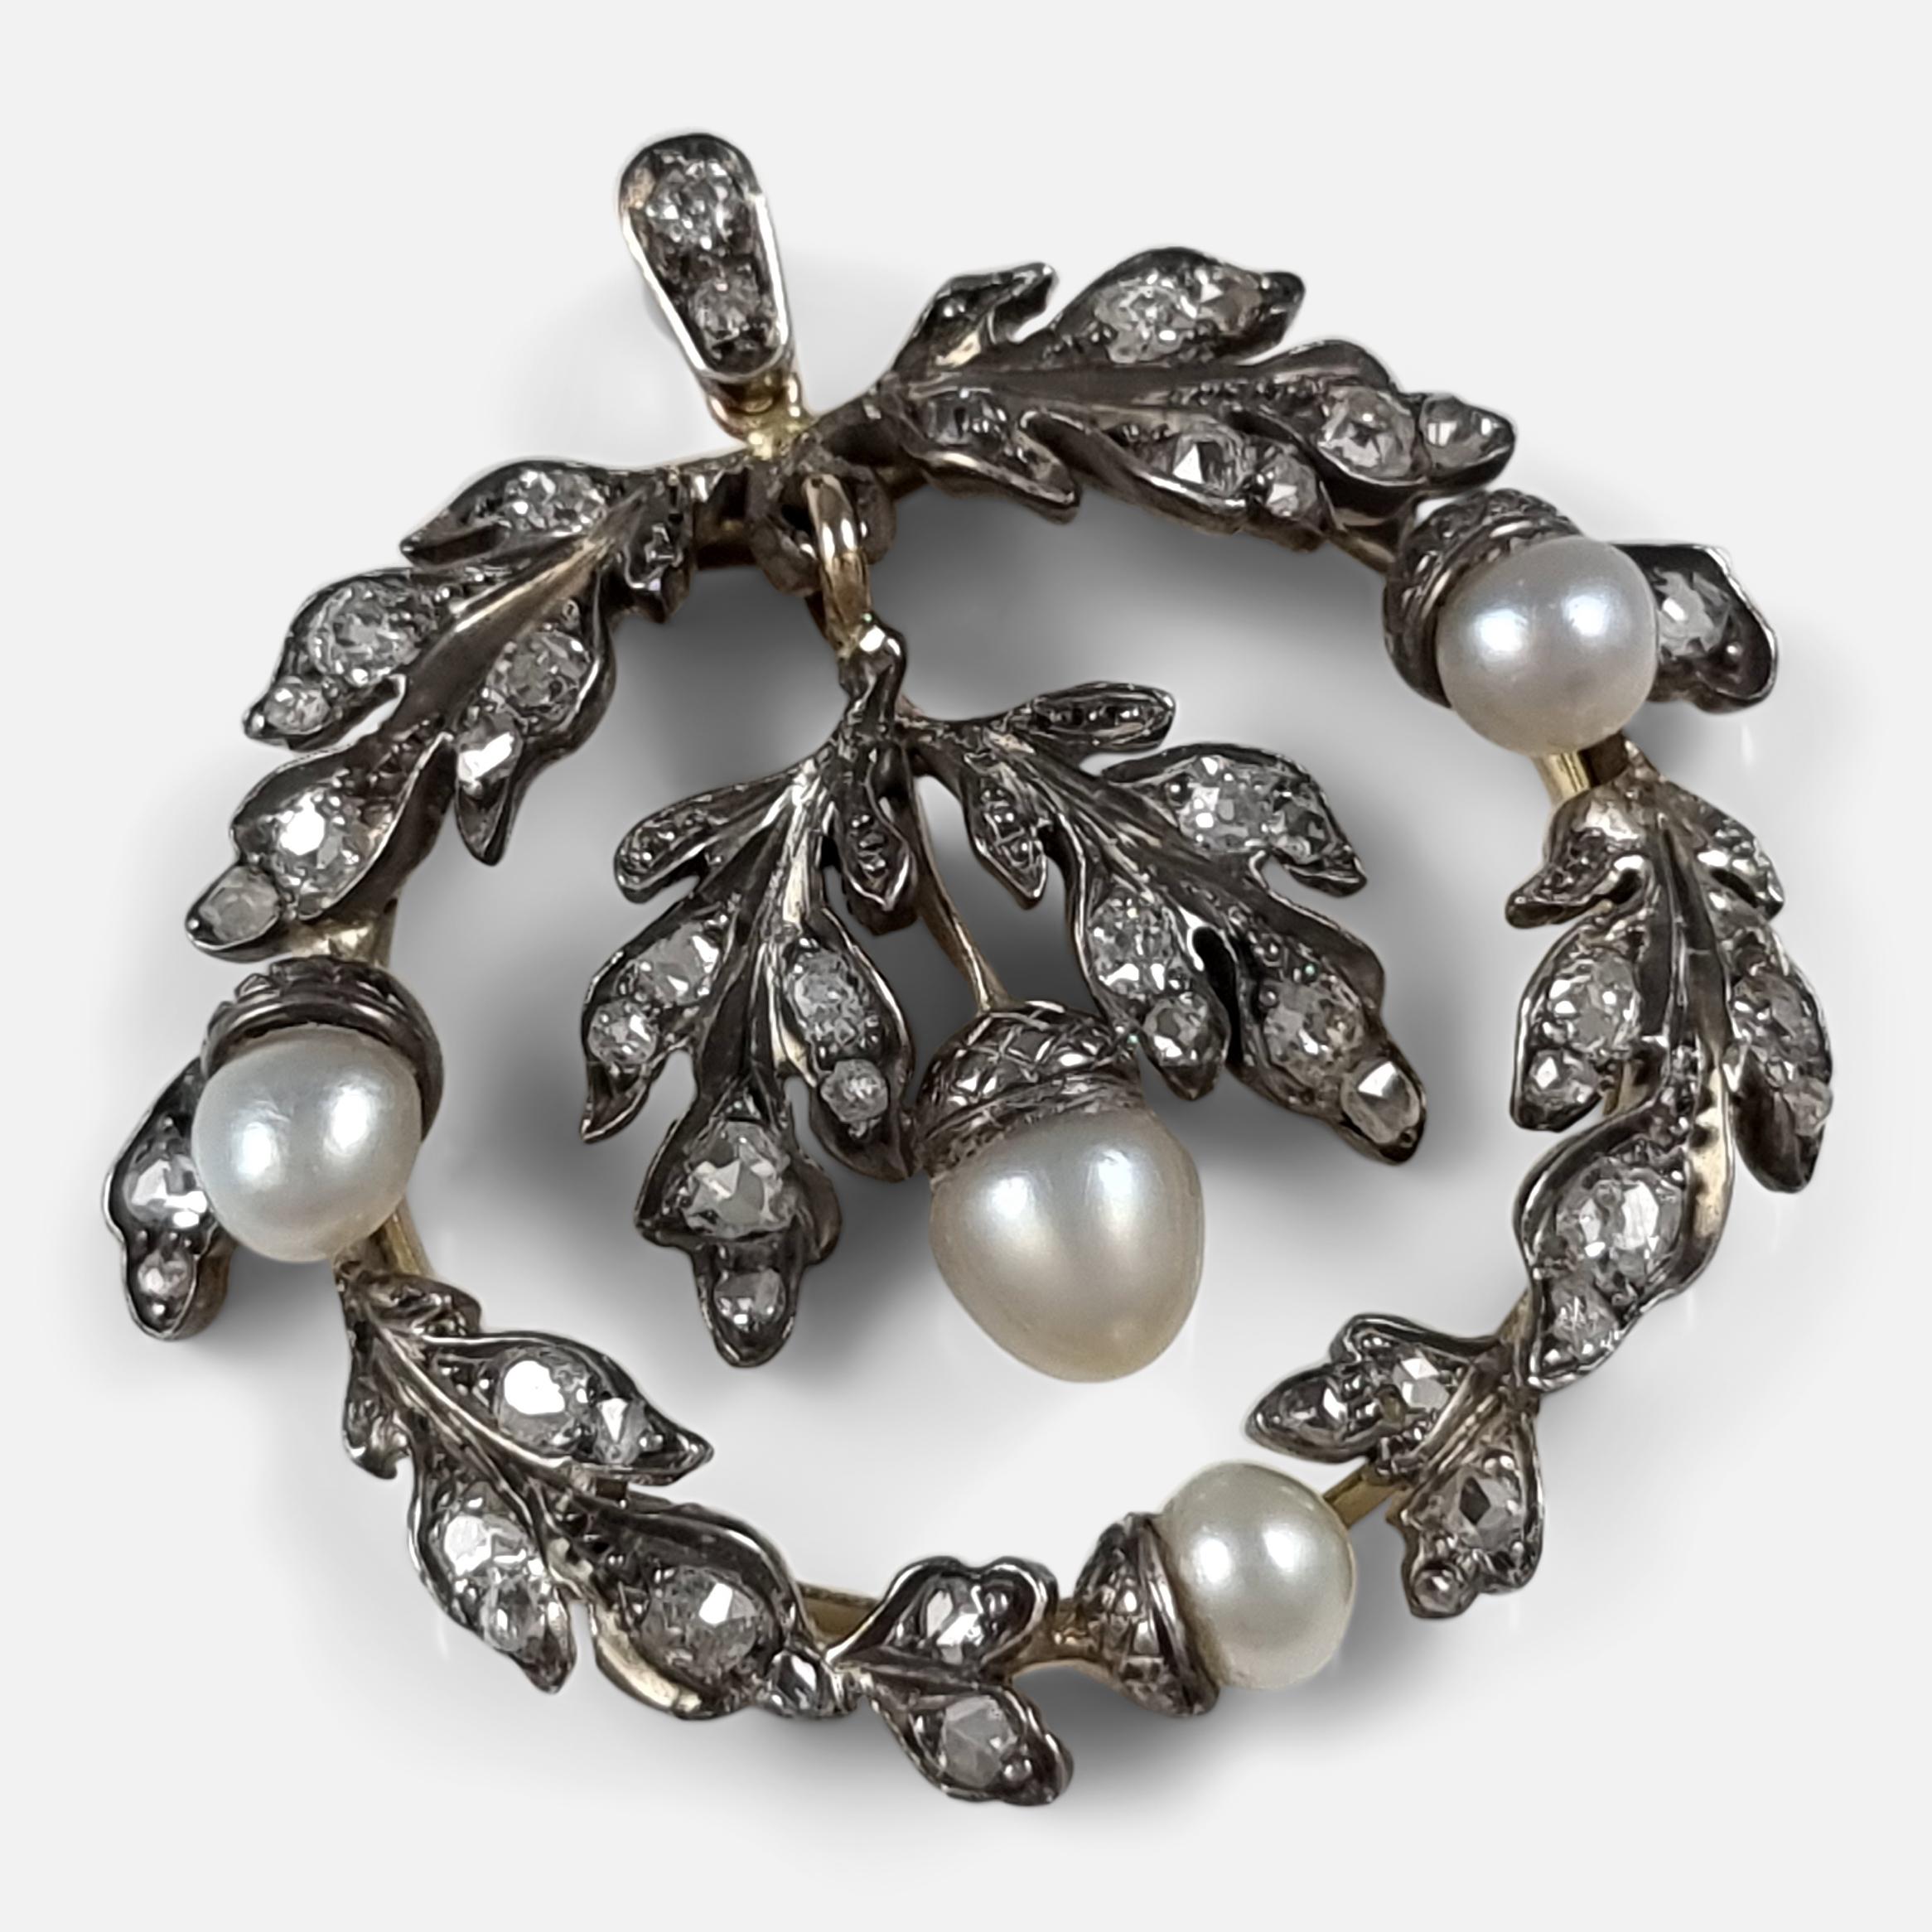 A mid 19th century diamond and pearl oak pendant. The pendant is designed as a wreath of oak leaves, and a suspended central foliate drop. It is set with old cushion-shaped and rose-cut diamonds and seed pearls, in silver on gold, leading to a